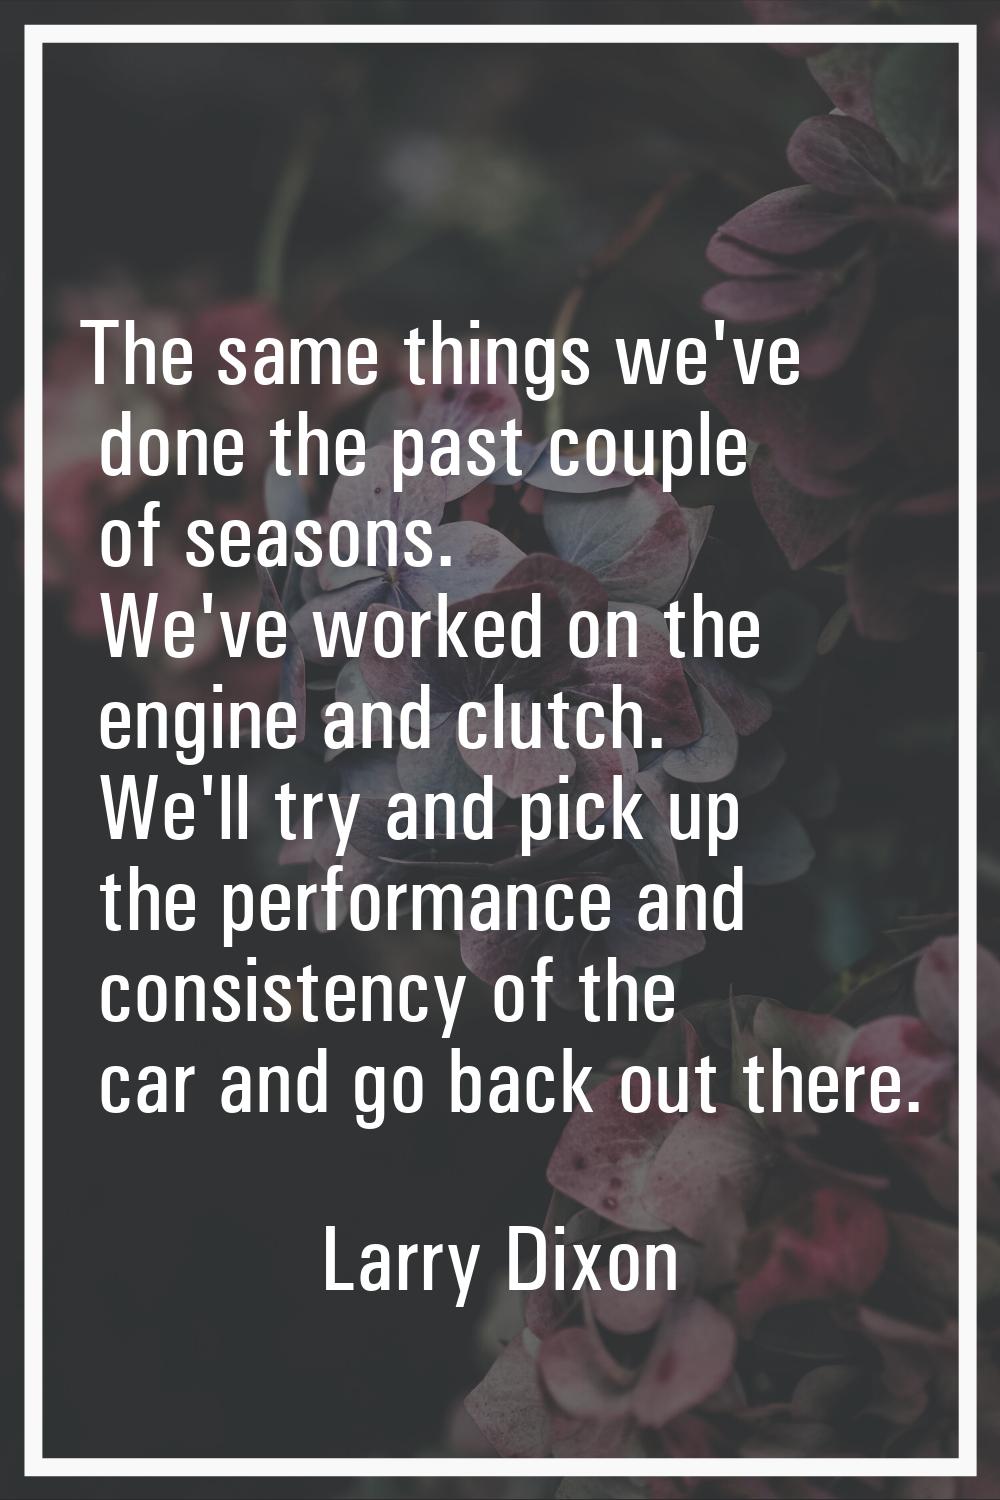 The same things we've done the past couple of seasons. We've worked on the engine and clutch. We'll